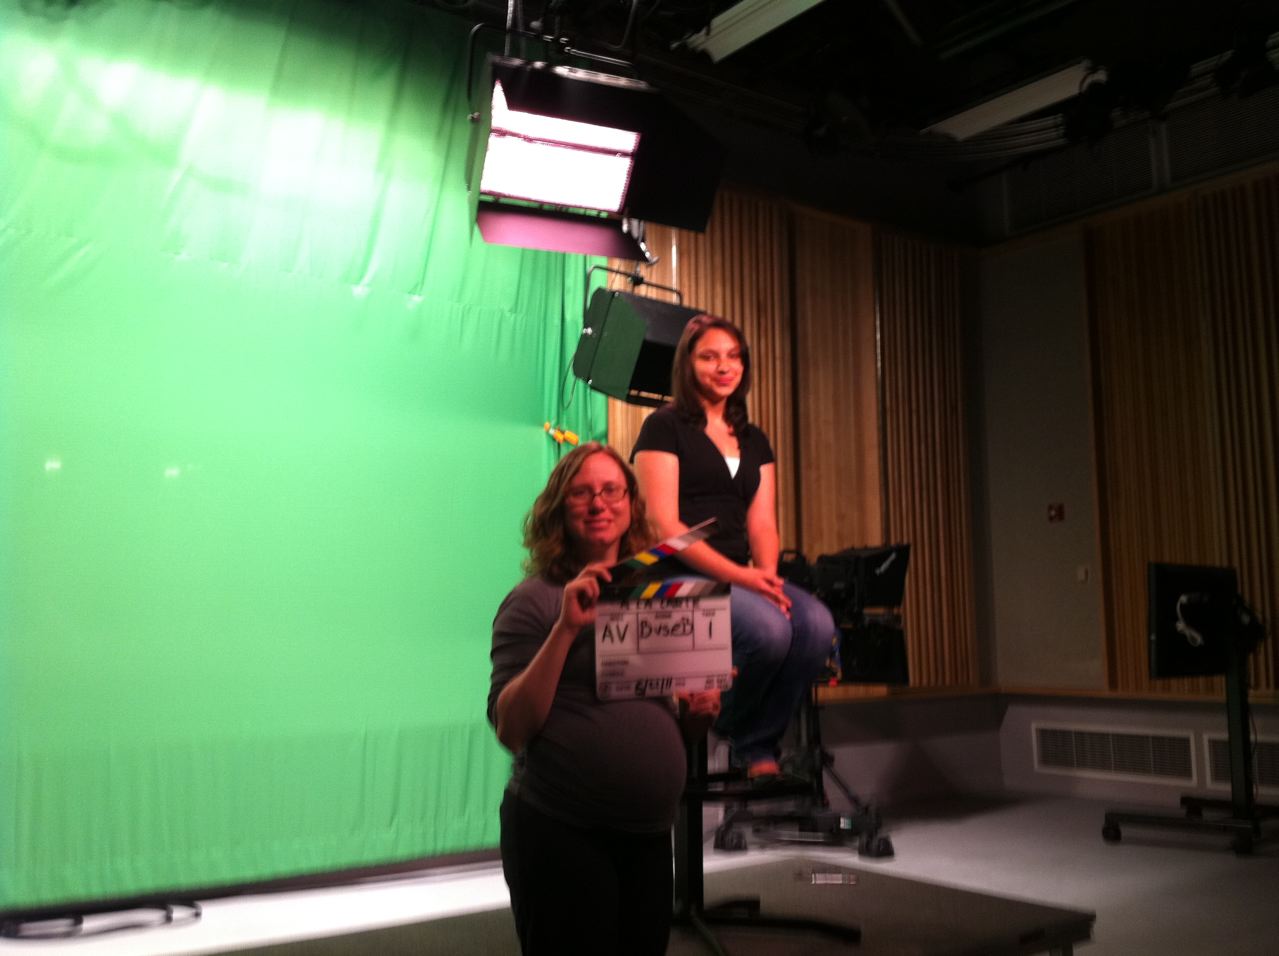 Allie Verbovetskaya (Instructional Technologies Librarian; seated) and Jennifer King (Science Librarian) posing in front of the green screen before 'Action!' is called